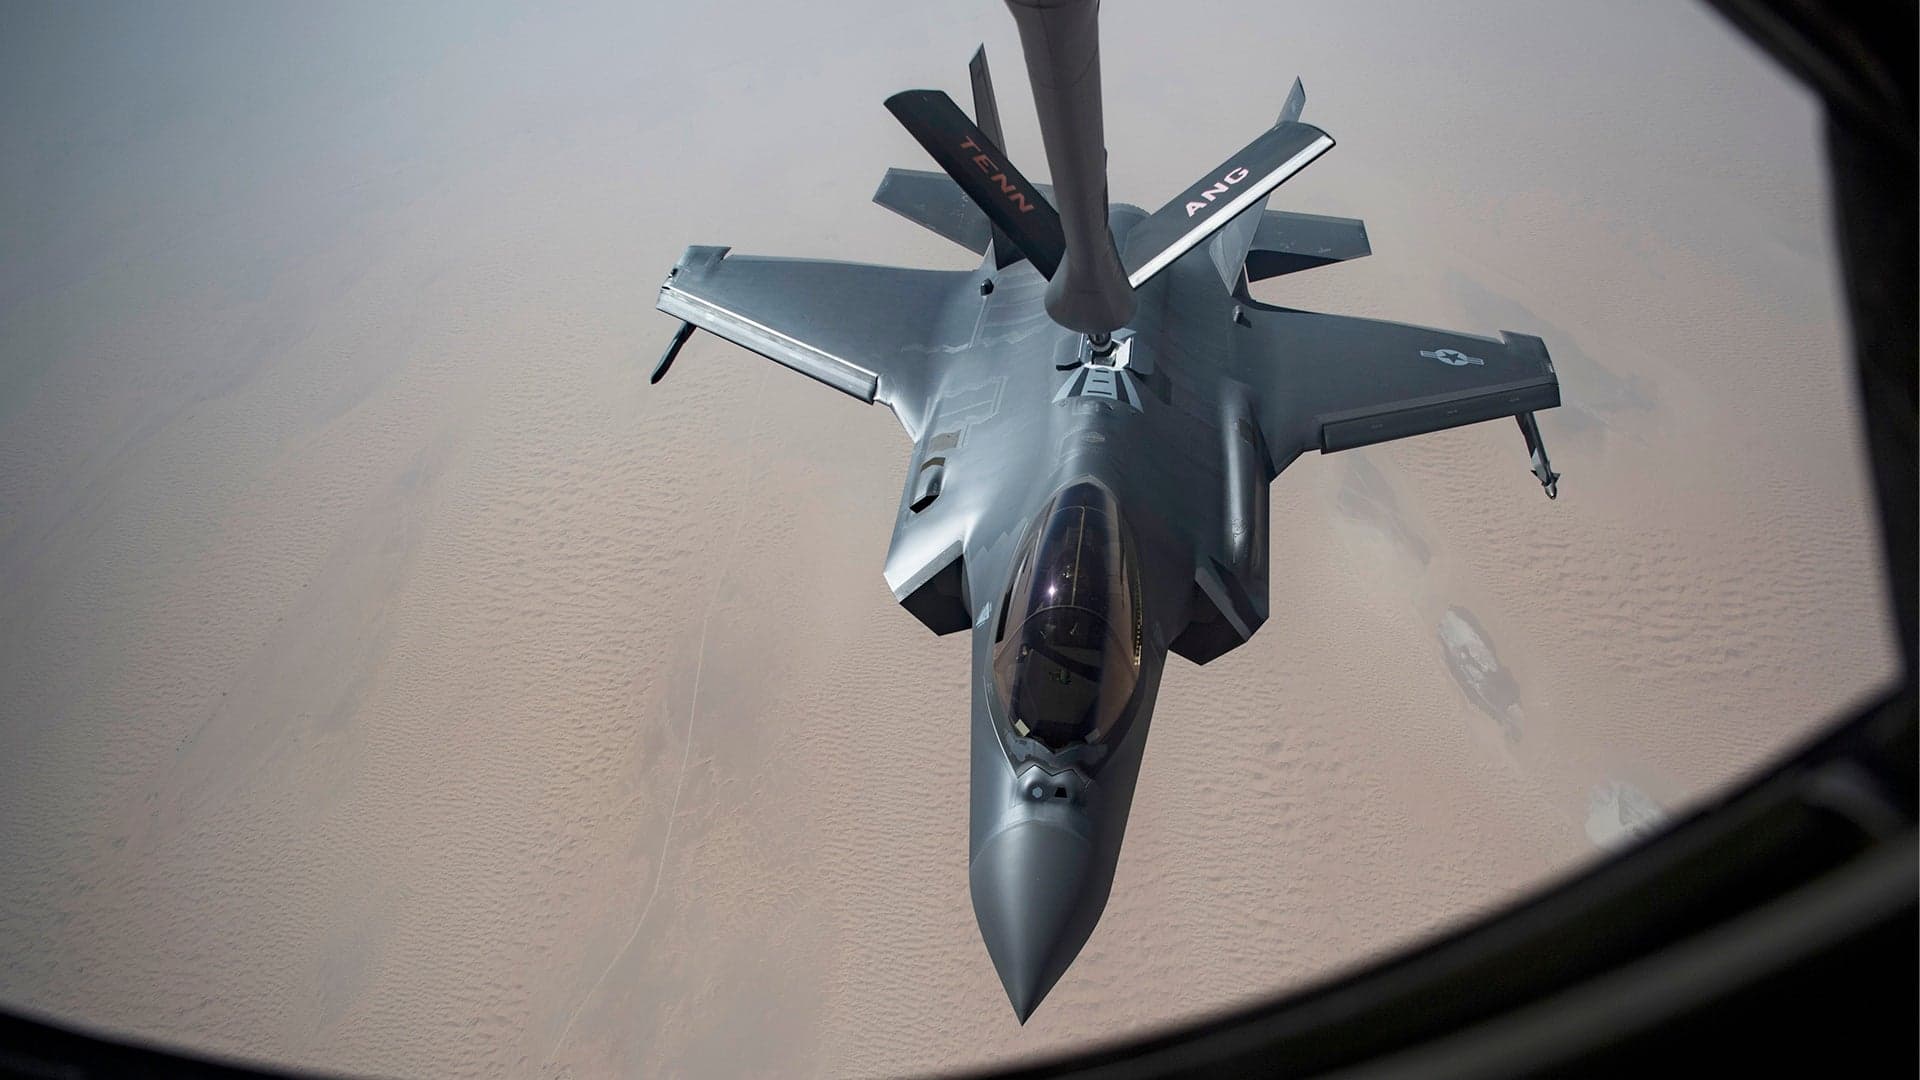 F-35A Pictured On “Deterrence Mission” Over Middle East With Peculiar Single Missile Loadout